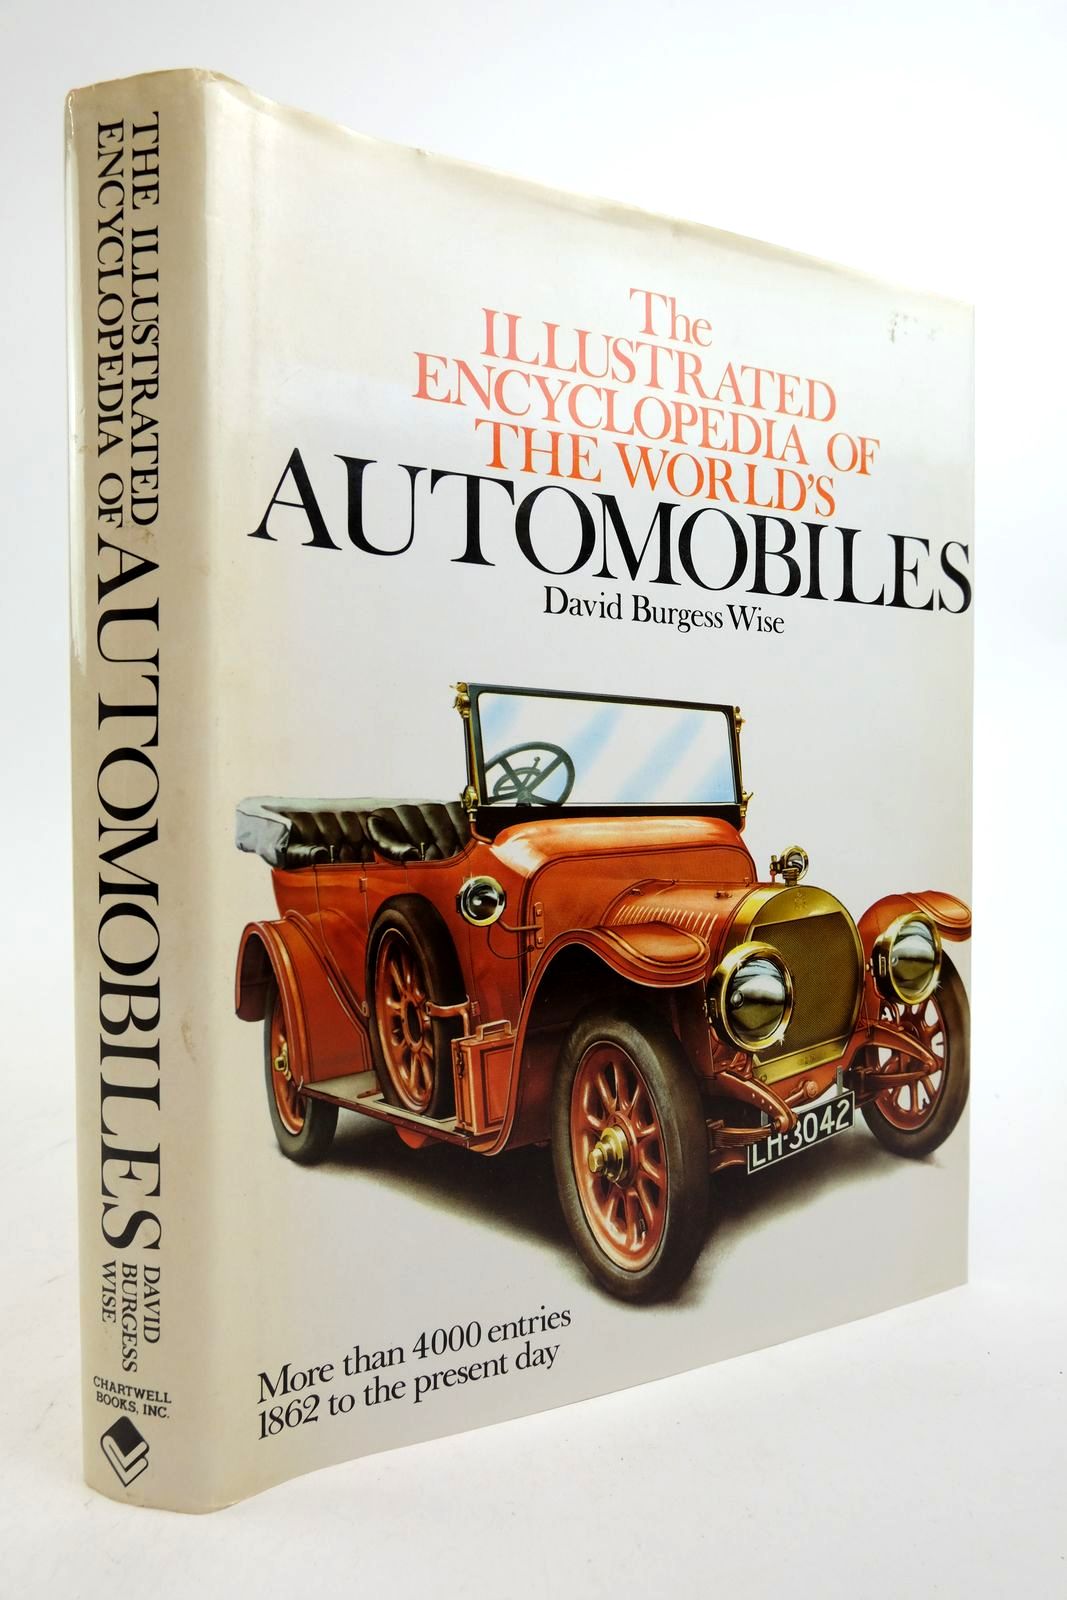 Photo of THE ILLUSTRATED ENCYCLOPEDIA OF AUTOMOBILES written by Wise, David Burgess published by Chartwell Books Inc. (STOCK CODE: 2140169)  for sale by Stella & Rose's Books